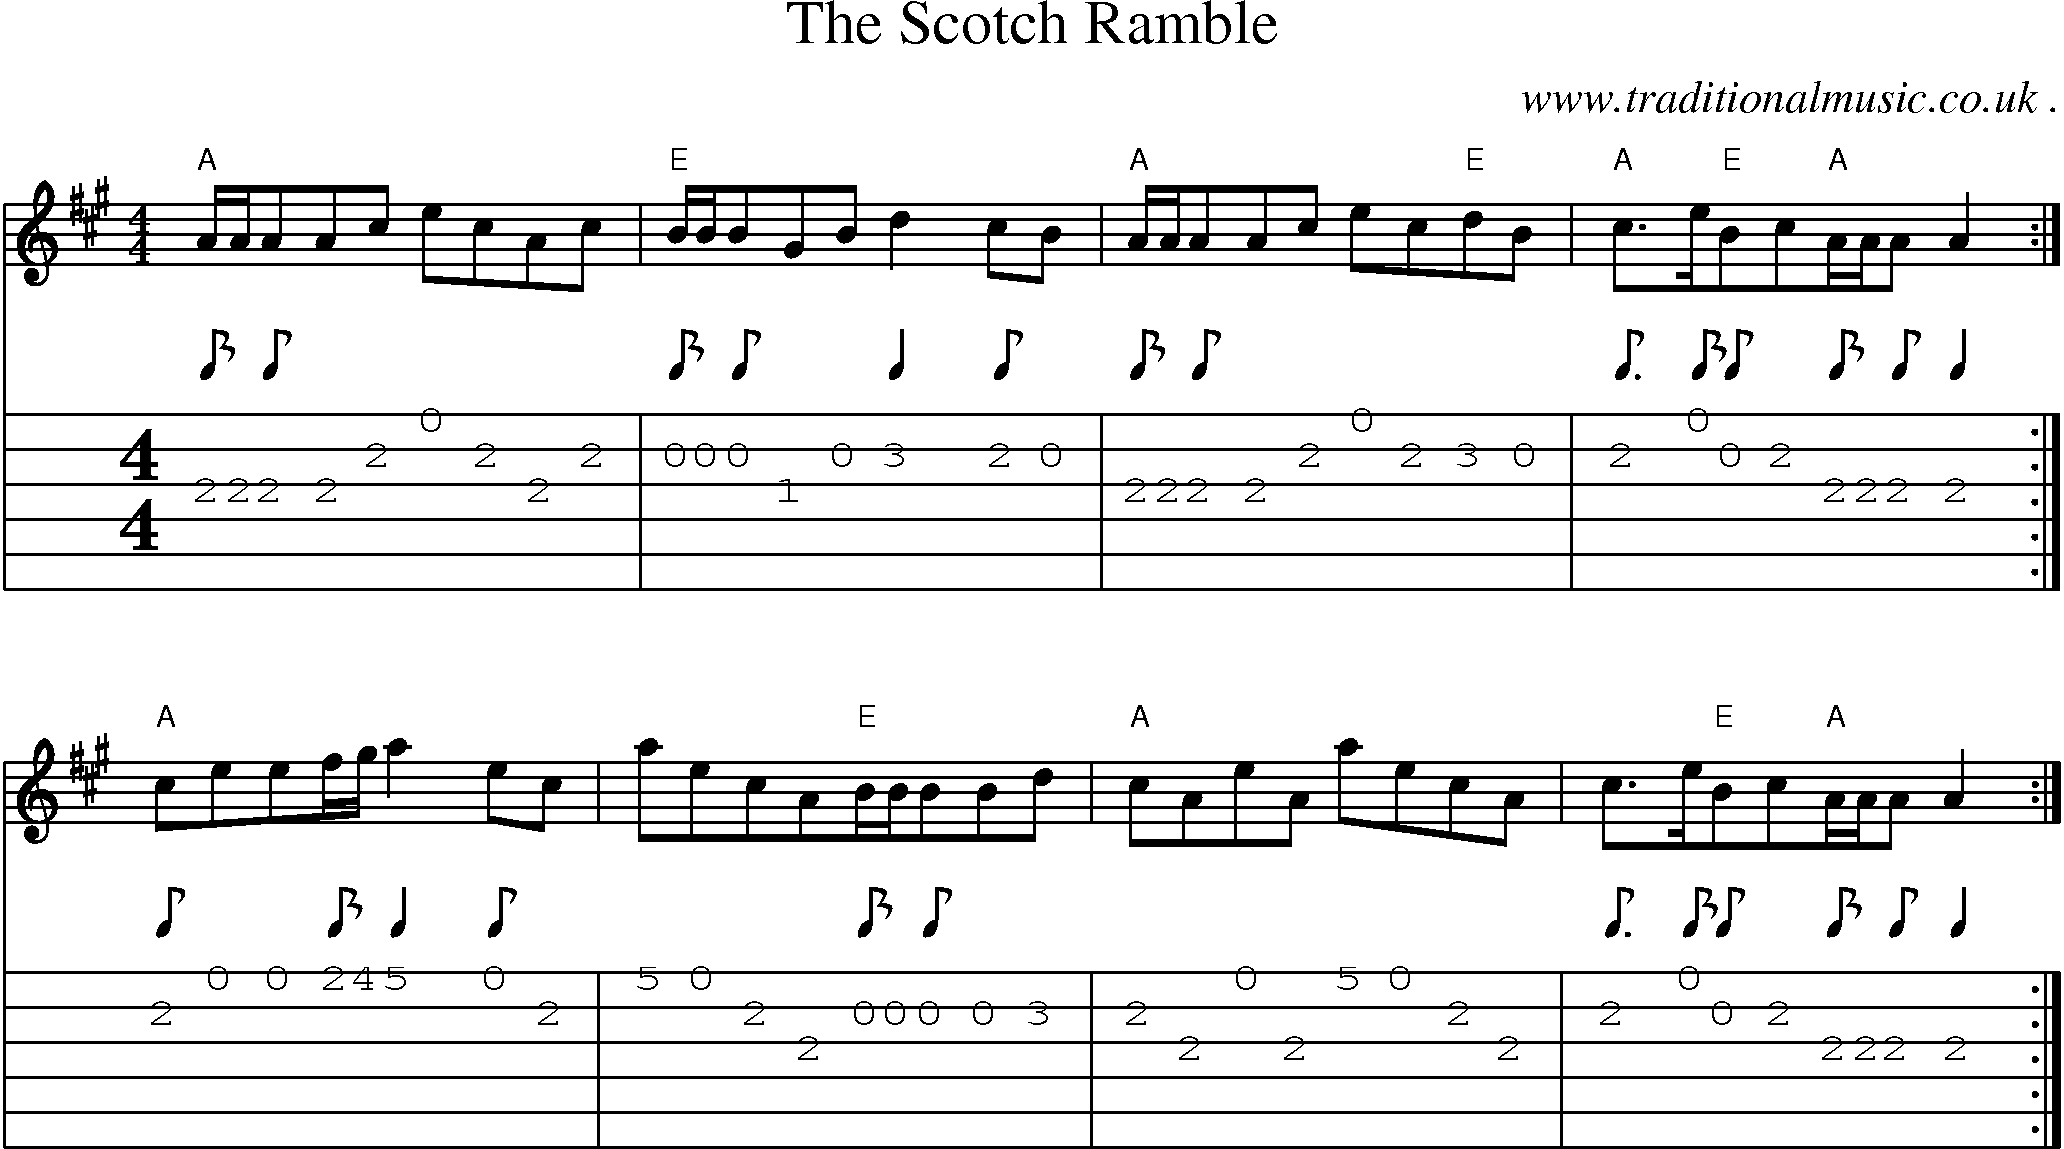 Sheet-Music and Guitar Tabs for The Scotch Ramble